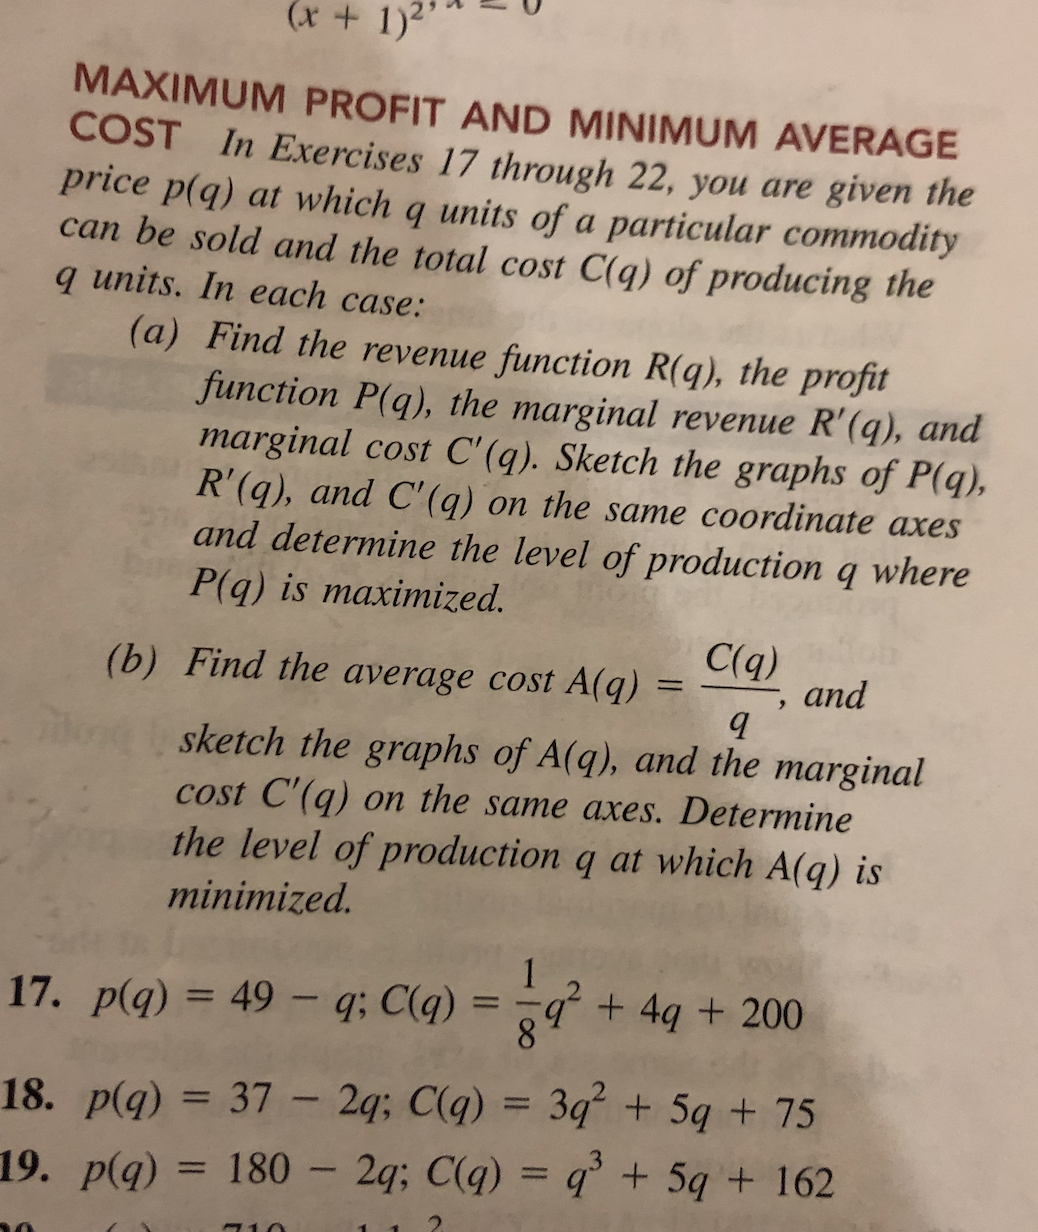 (x+ 1)2
MAXIMUM PROFIT AND MINIMUM AVERAGE
COST In Exercises 17 through 22, you are given the
price p(q) at which q units of a particular commodity
can be sold and the total cost C(q) of producing the
q units. In each case:
(a) Find the revenue function R(q), the profit
function P(q), the marginal revenue R'(q), and
marginal cost C'(q). Sketch the graphs of P(q),
R'(q), and C'(q) on the same coordinate axes
and determine the level of production q where
P(q) is maximized.
(b) Find the average cost A(q)
C(q)
and
sketch the graphs of A(q), and the marginal
cost C'(q) on the same axes. Determine
the level of production q at which A(q) is
minimized.
17. p(q) = 49 - q; C(q) = -q + 4q + 200
%3D
18. p(q) = 37 – 2q; C(q) = 3q² + 5q + 75
%3D
19. p(q) = 180 - 2q; C(q) = q'+ 5q + 162
%3D
